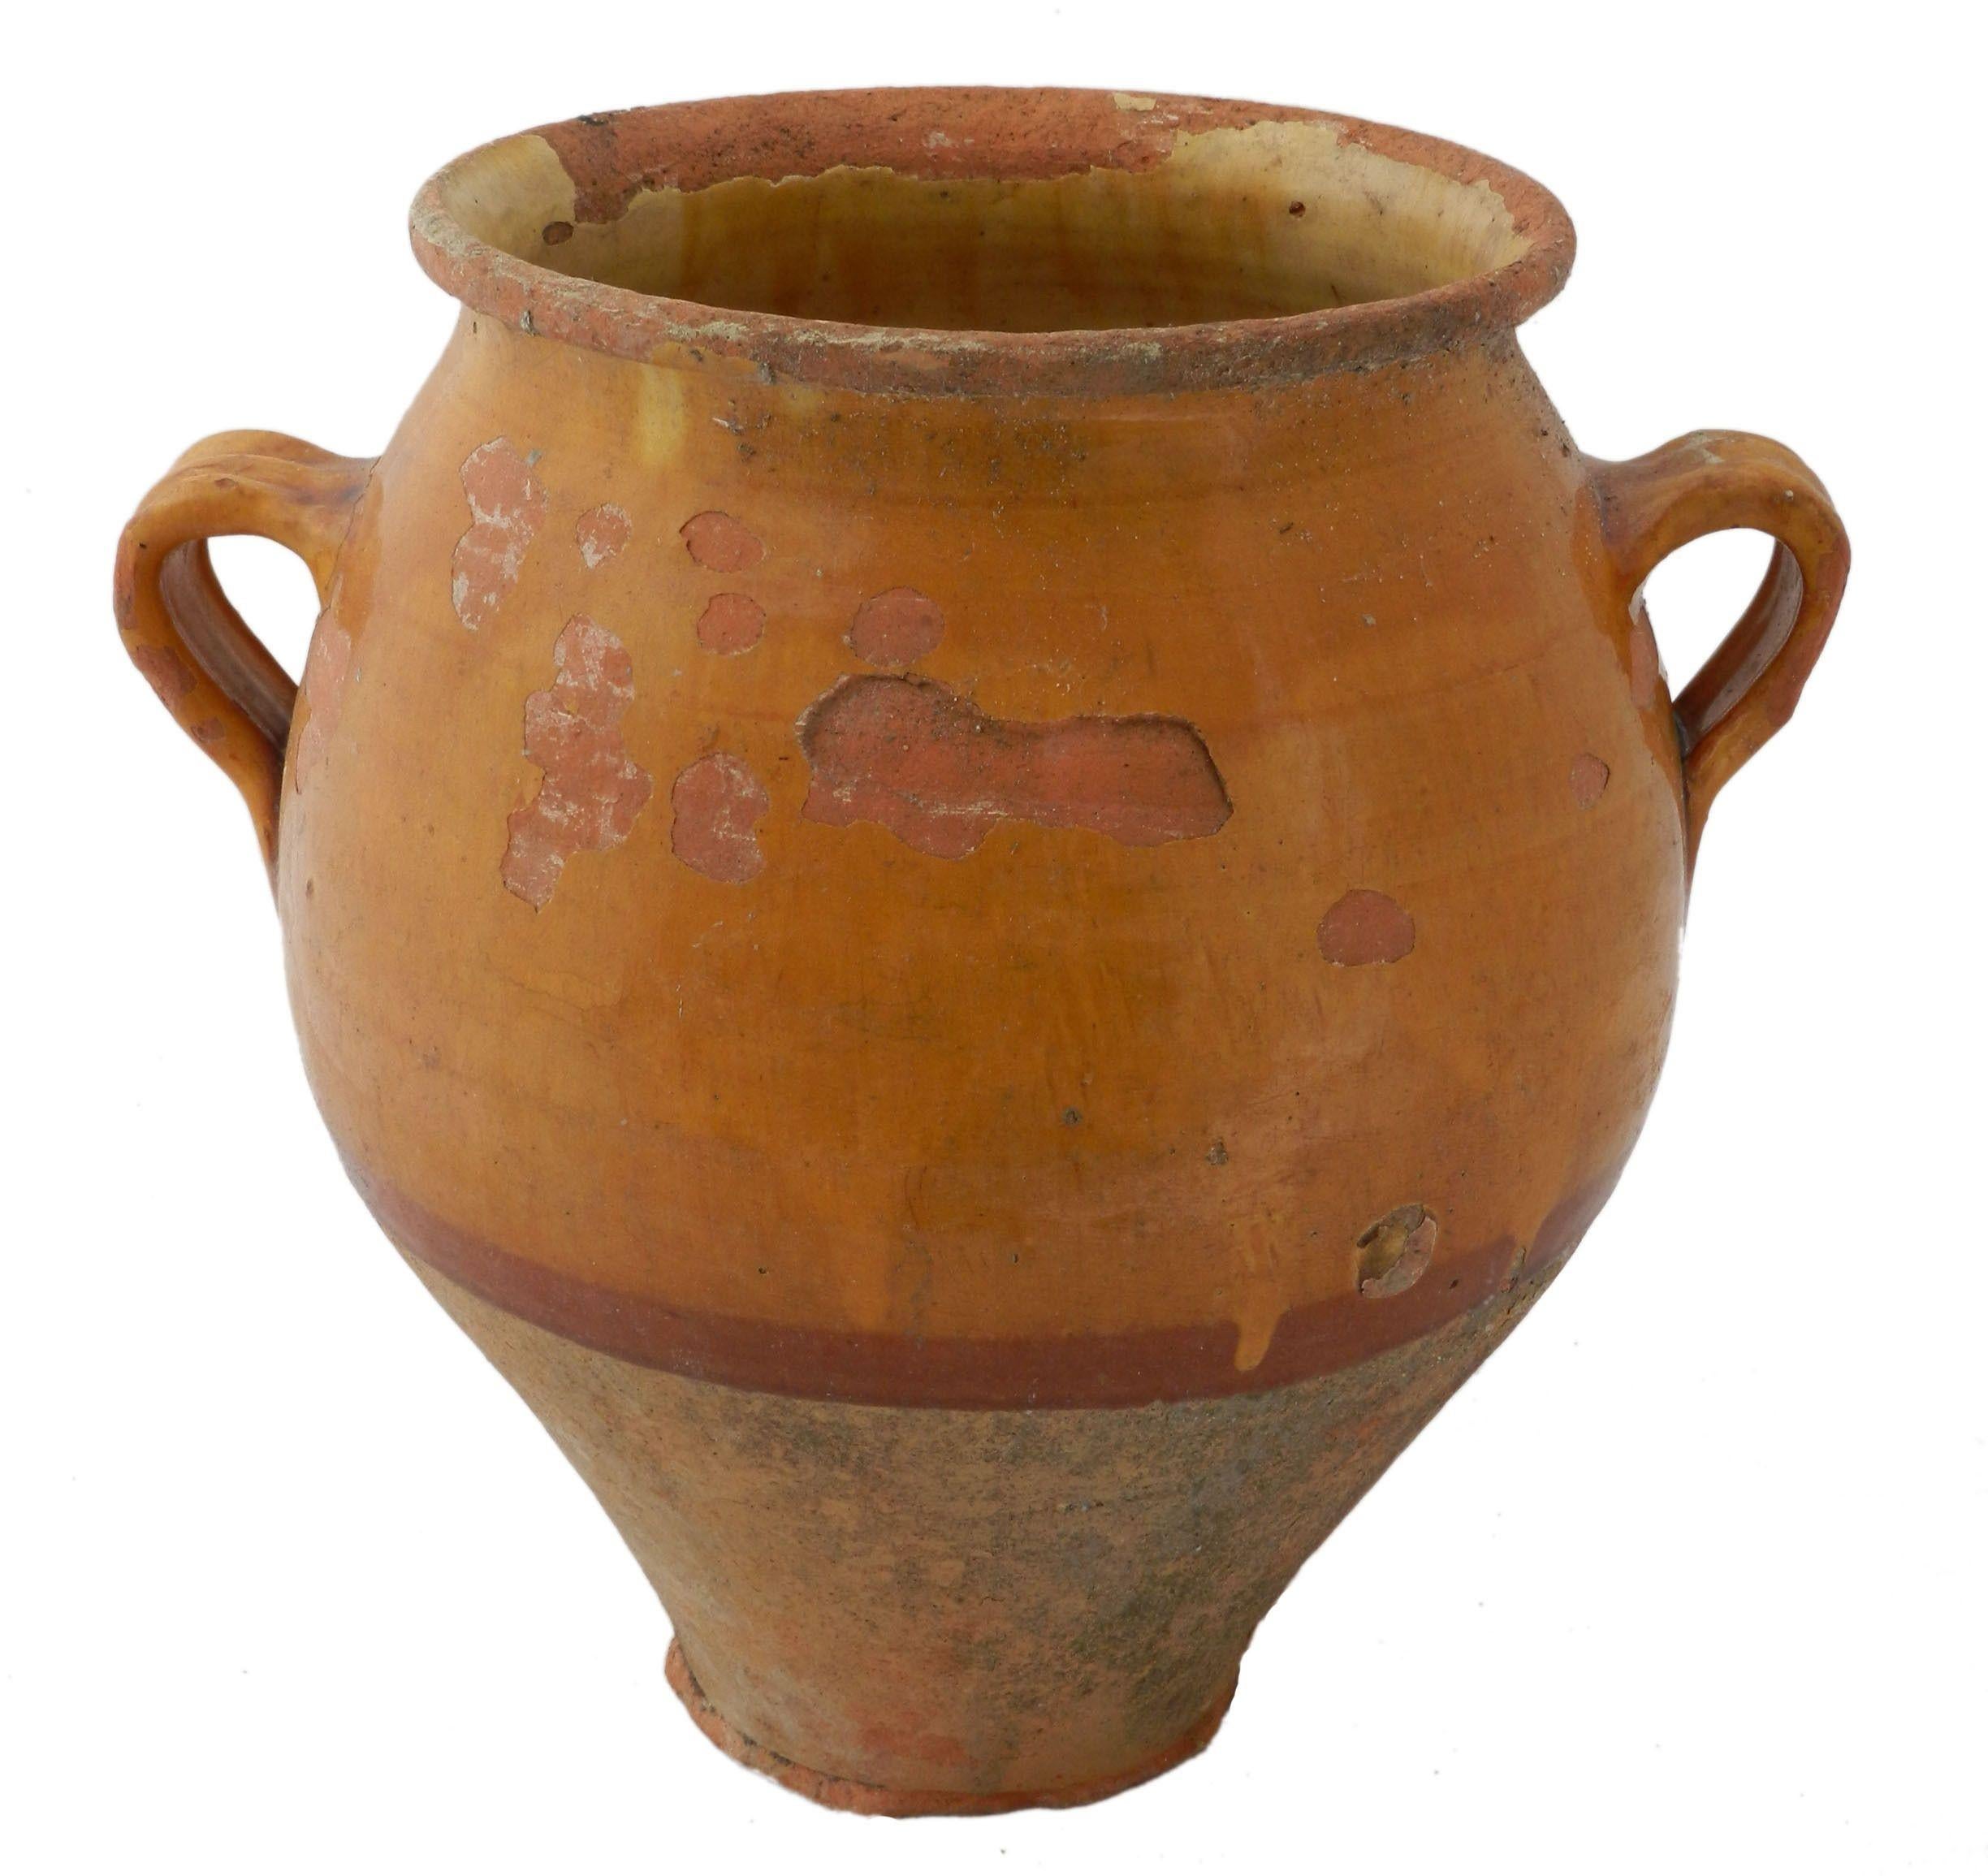 19th century terracotta French confit pot
Traditional large earthenware pottery confit pot from Southern France with yellow glaze
Very decorative
Good patina and bright yellow color with others no holes quite solid
Good antique condition.